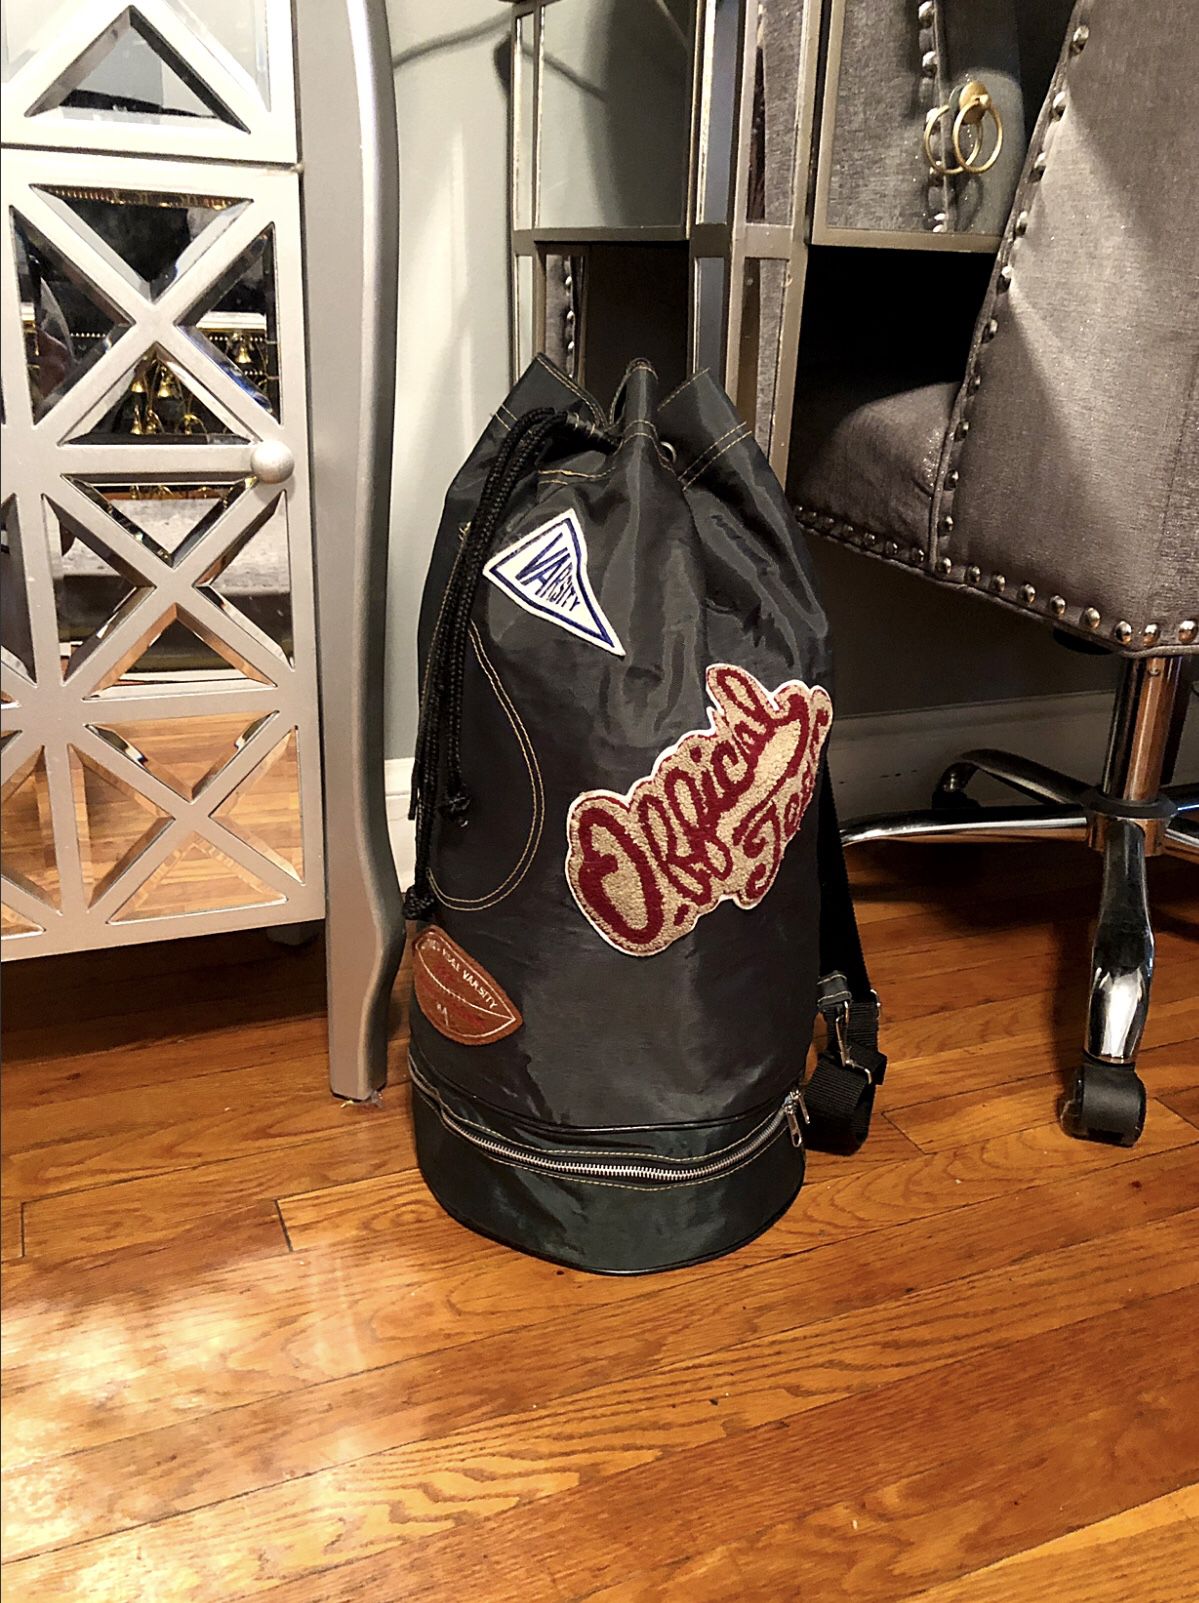 Men’s vintage varsity bag good condition! 21 inches long lots of storage space. A great weekend or travel bag. Clean interior can be worn as a cross